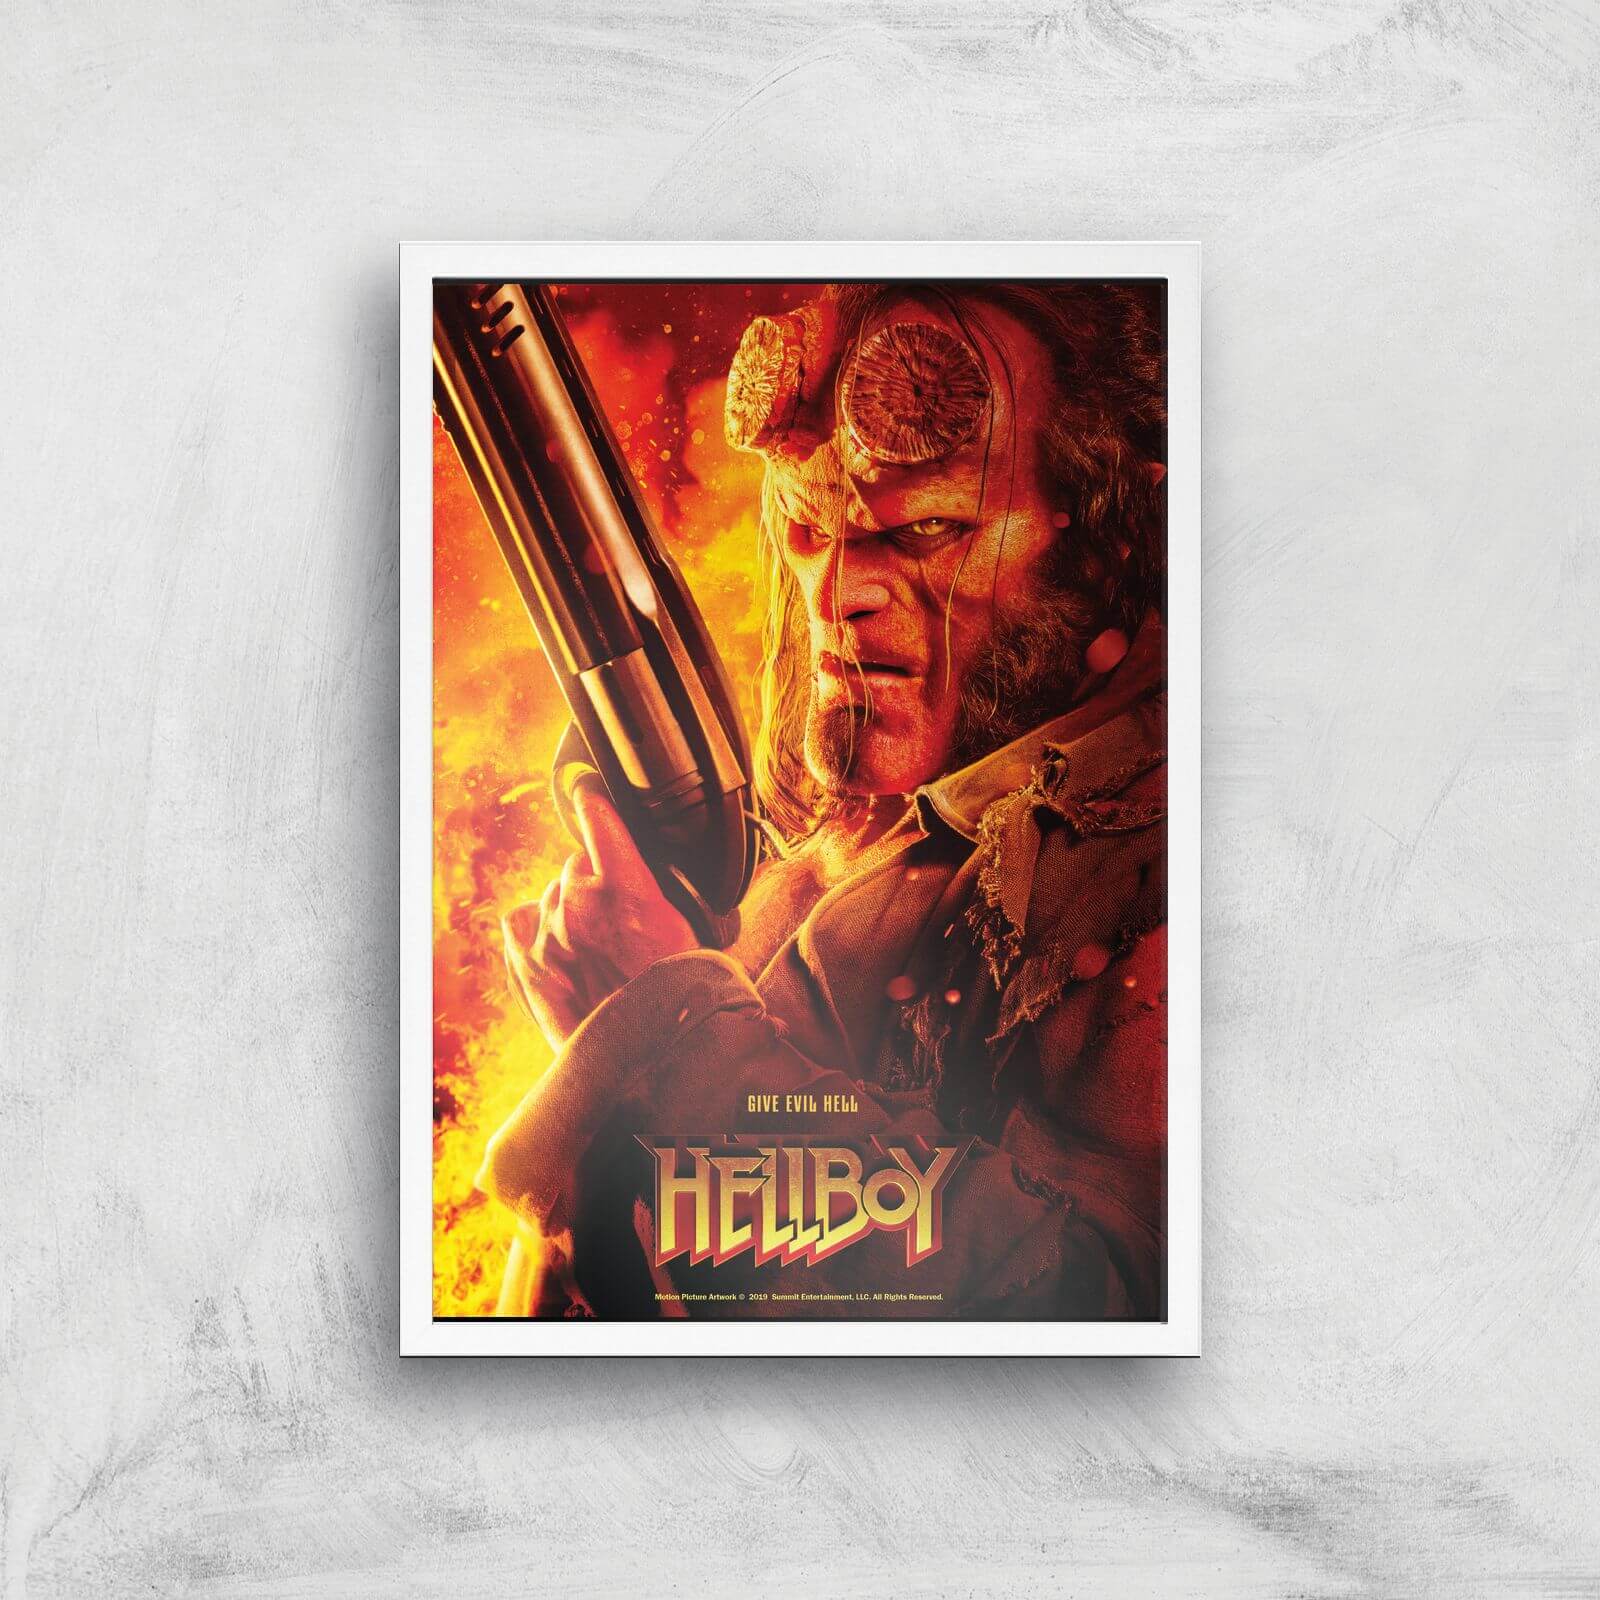 Hellboy Give Evil Hell Art Print - A3 - White Frame